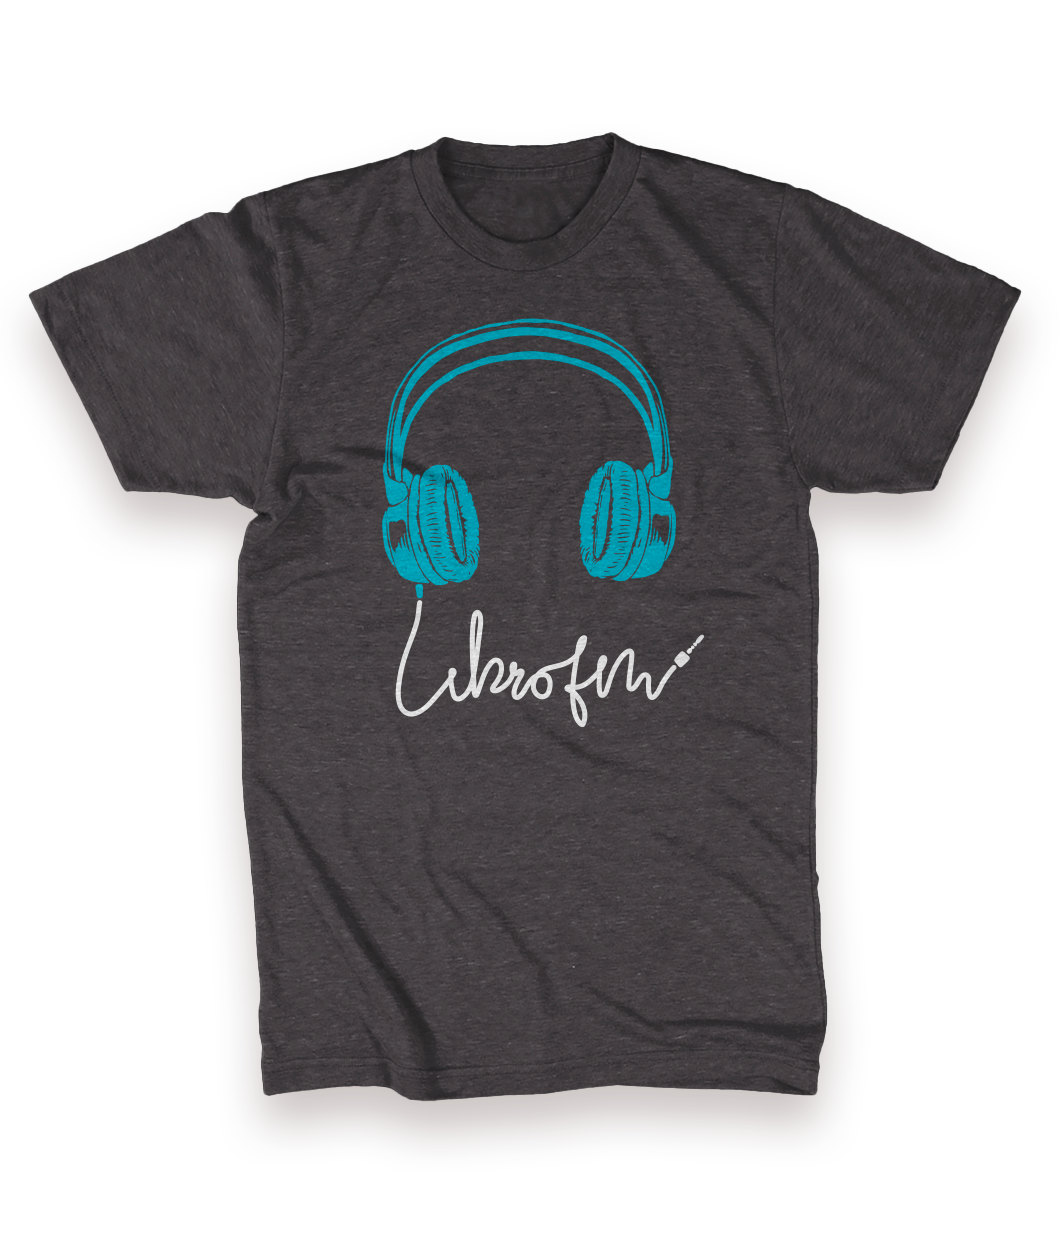 A gray shirt with drawn teal headphones. A white wire comes out of one of the ears of the headphones and forms “Libro.fm” - from Libro.fm